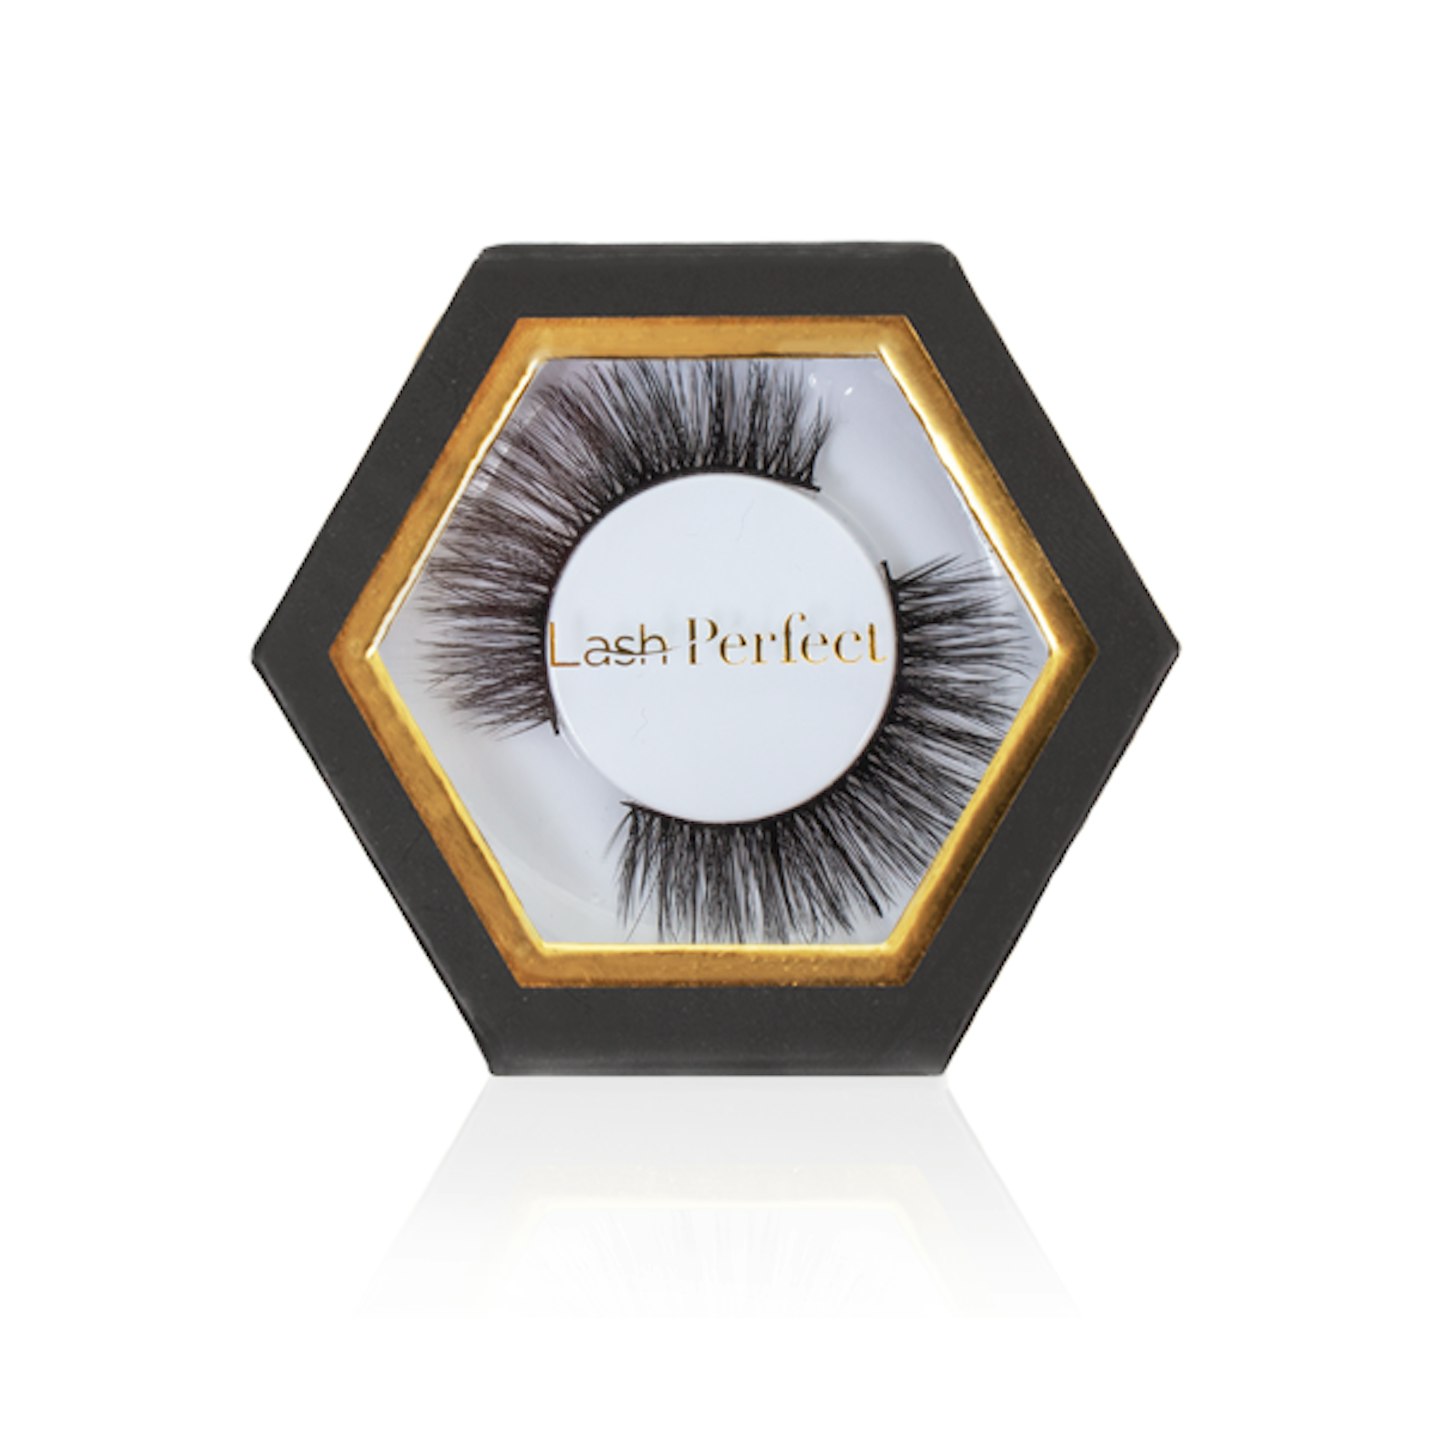 Look 2: Why Not Try - Lash Perfect In A Strip #3, £10.79